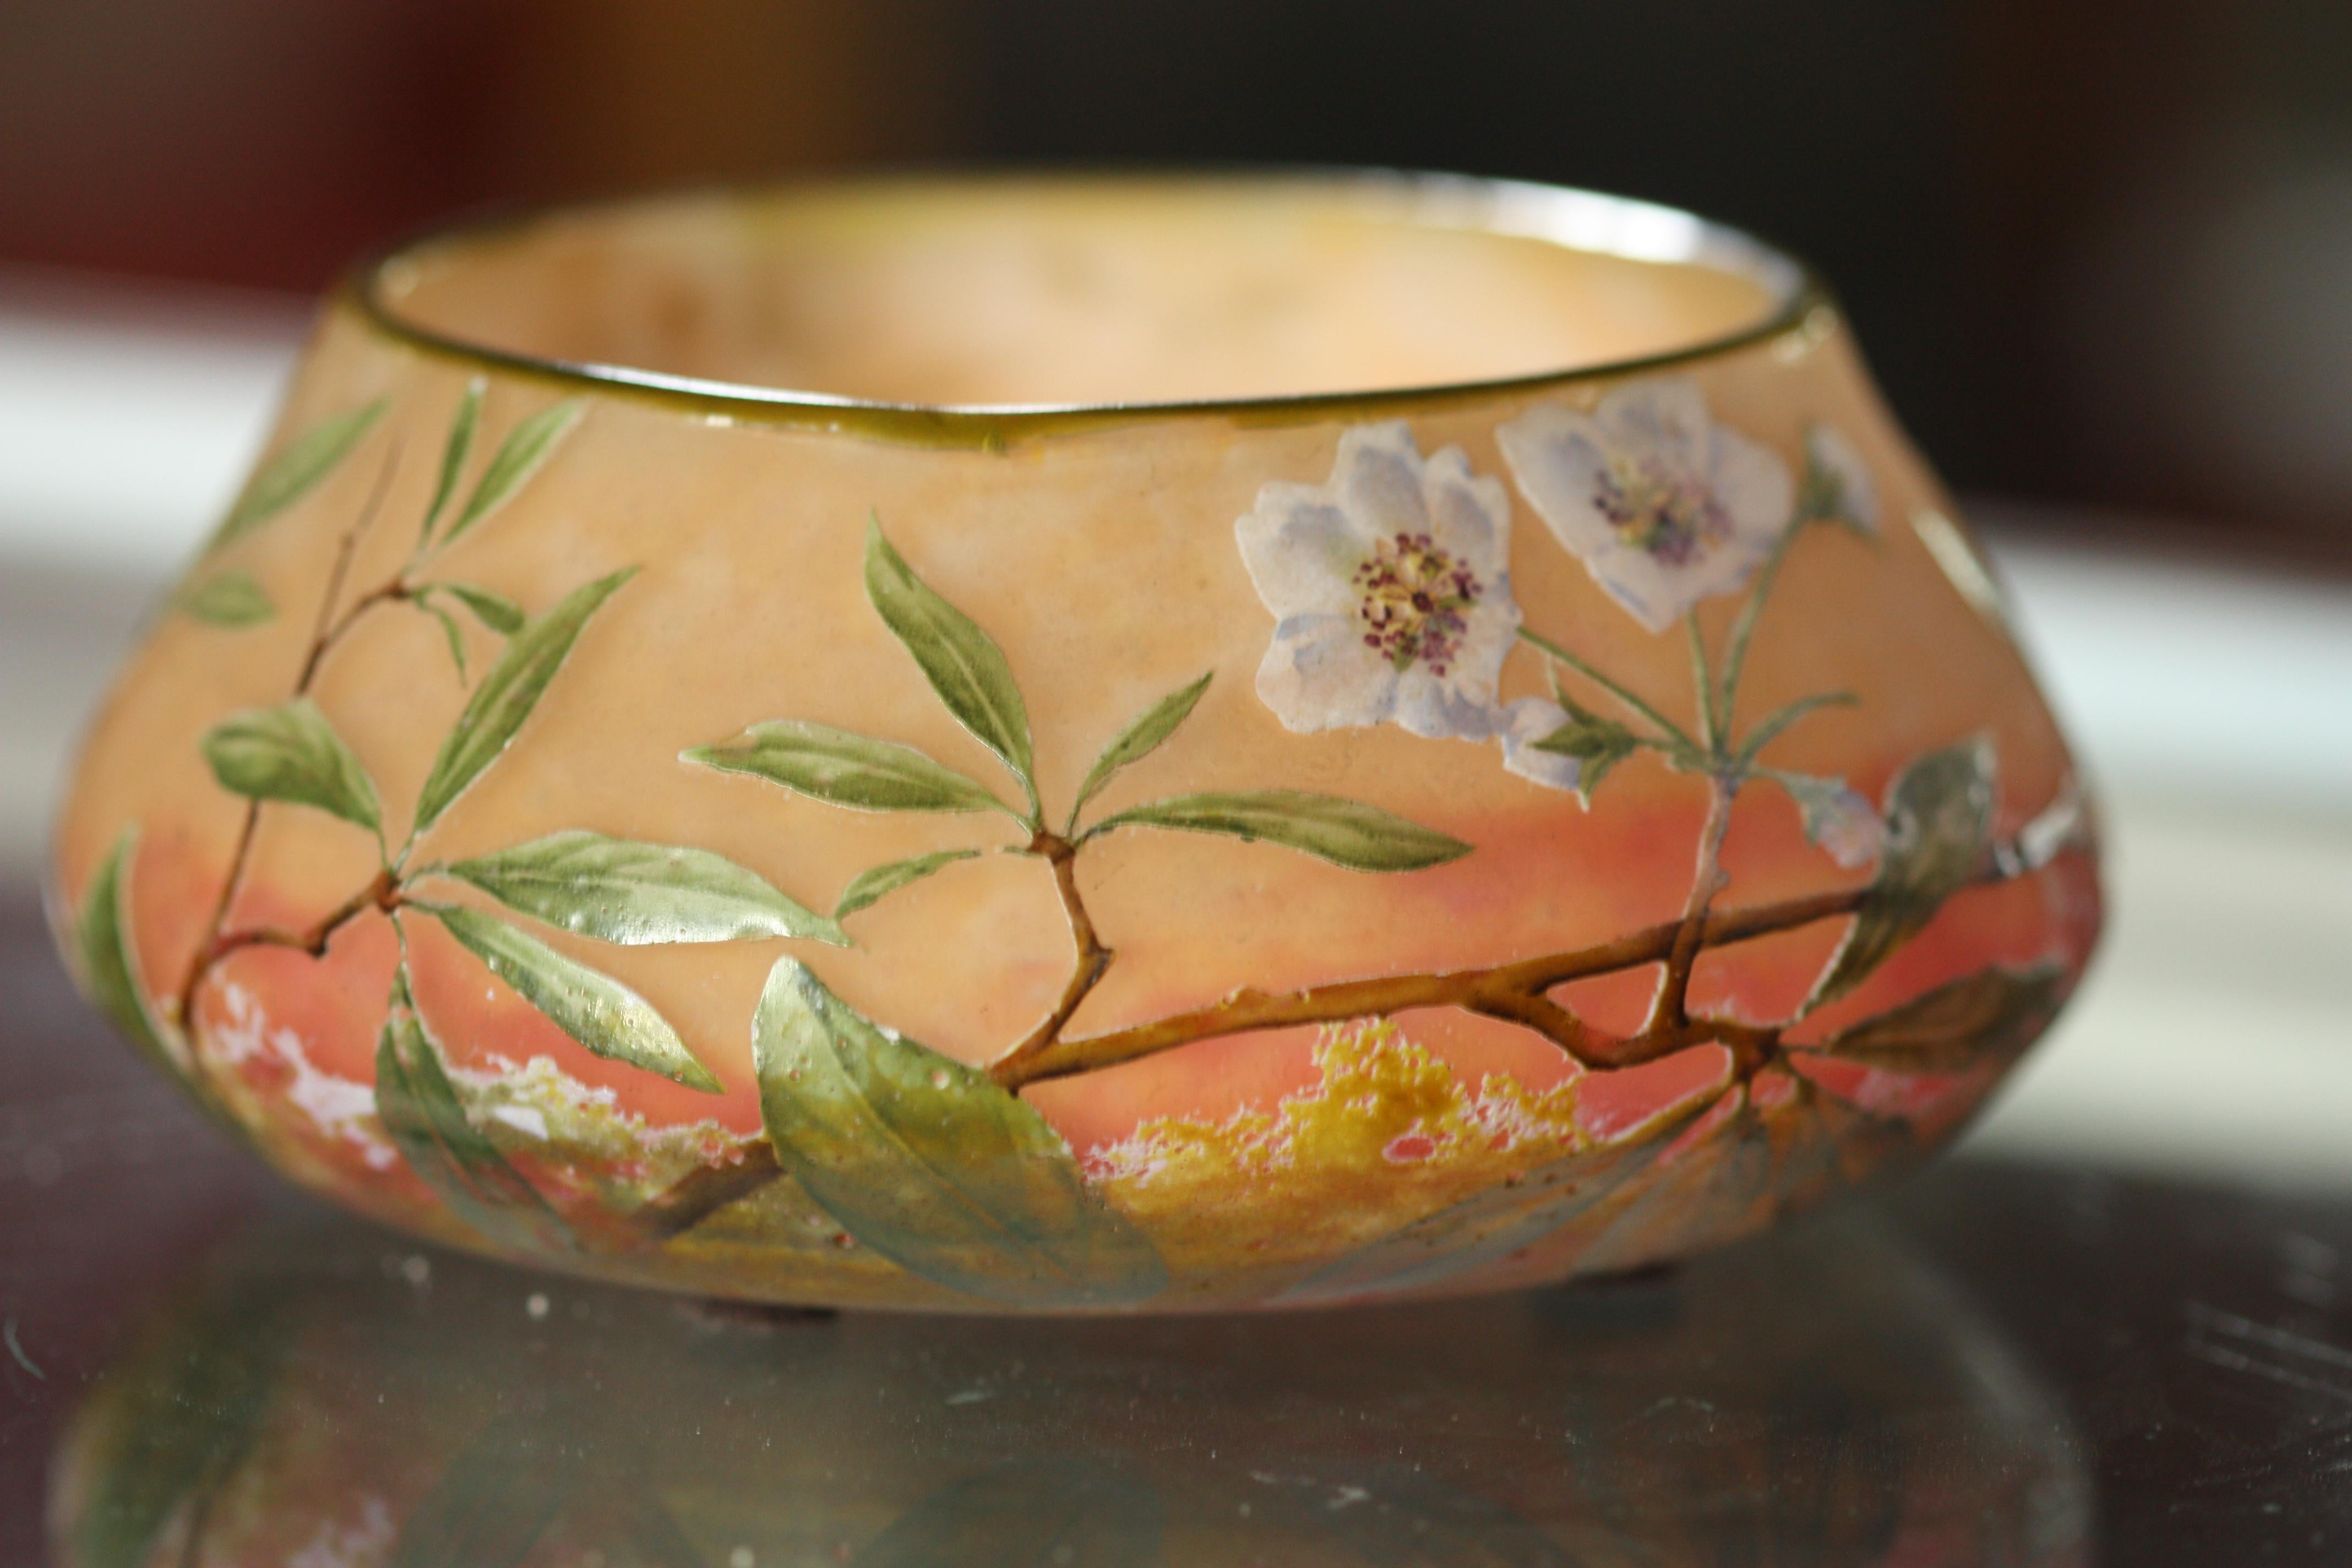 Daum Nancy Cameo glass vase,
France, circa 1910
decorated with white flowers and green leaves on a orange and pink ground
cameo mark Daum Nancy with Lorraine cross
Dimensions:
Width 13.5 cm.
Height
6.0 cm.
Shipping
Free shipping express to